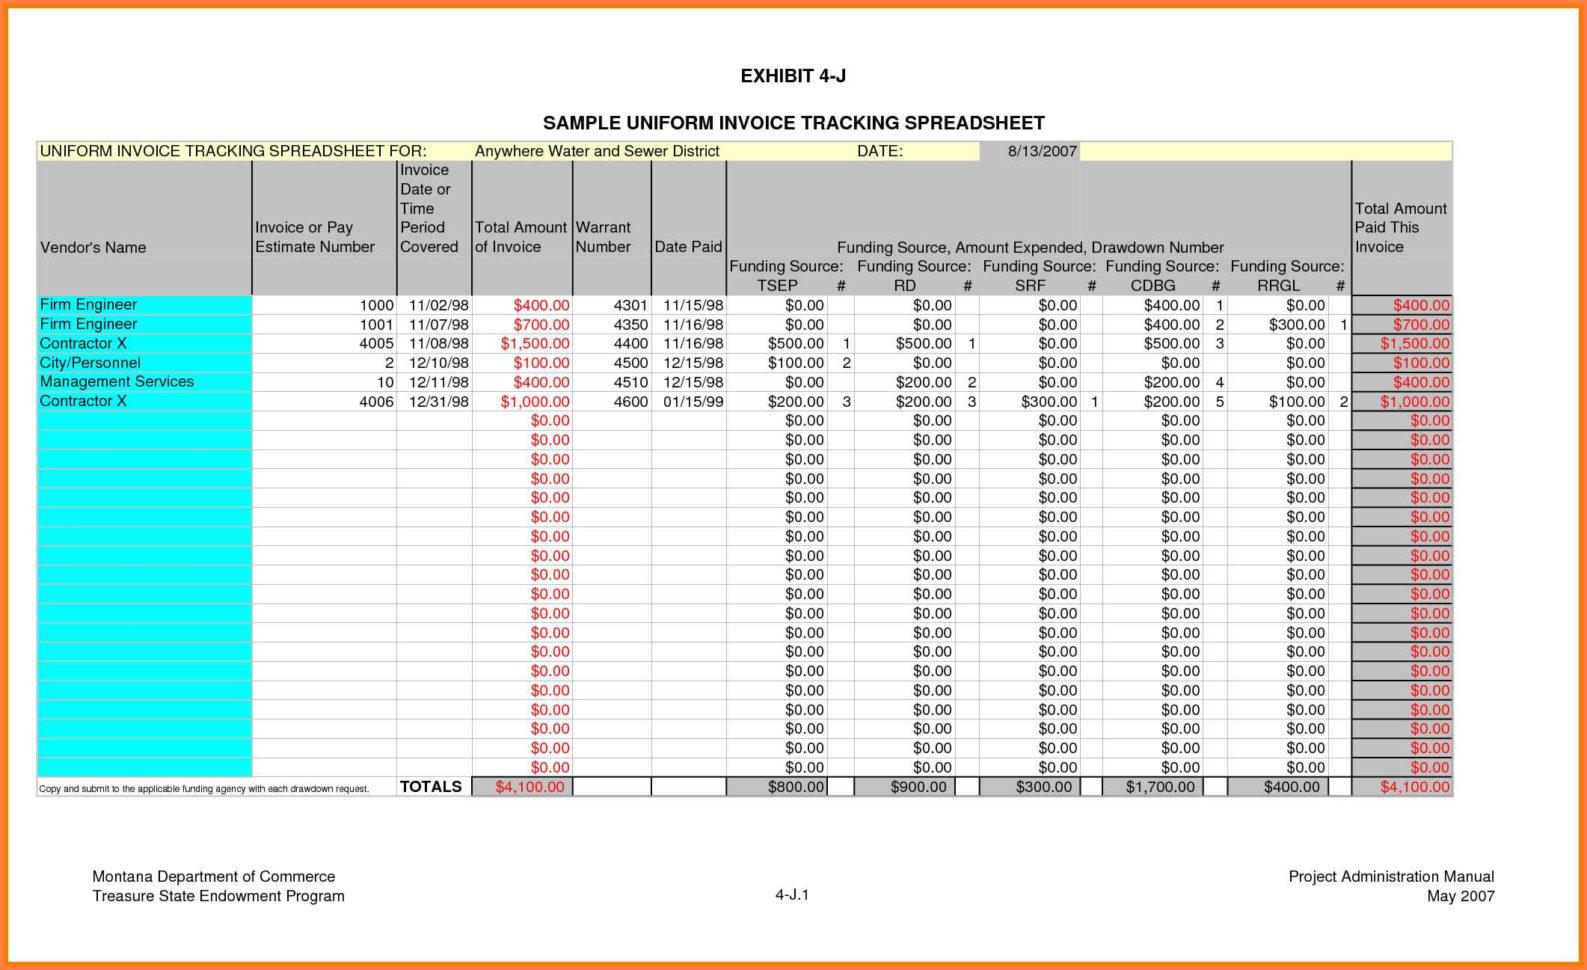 Purchase Order Tracking Excel Spreadsheet for Spreadsheet Example Of Procurement Tracking Excel